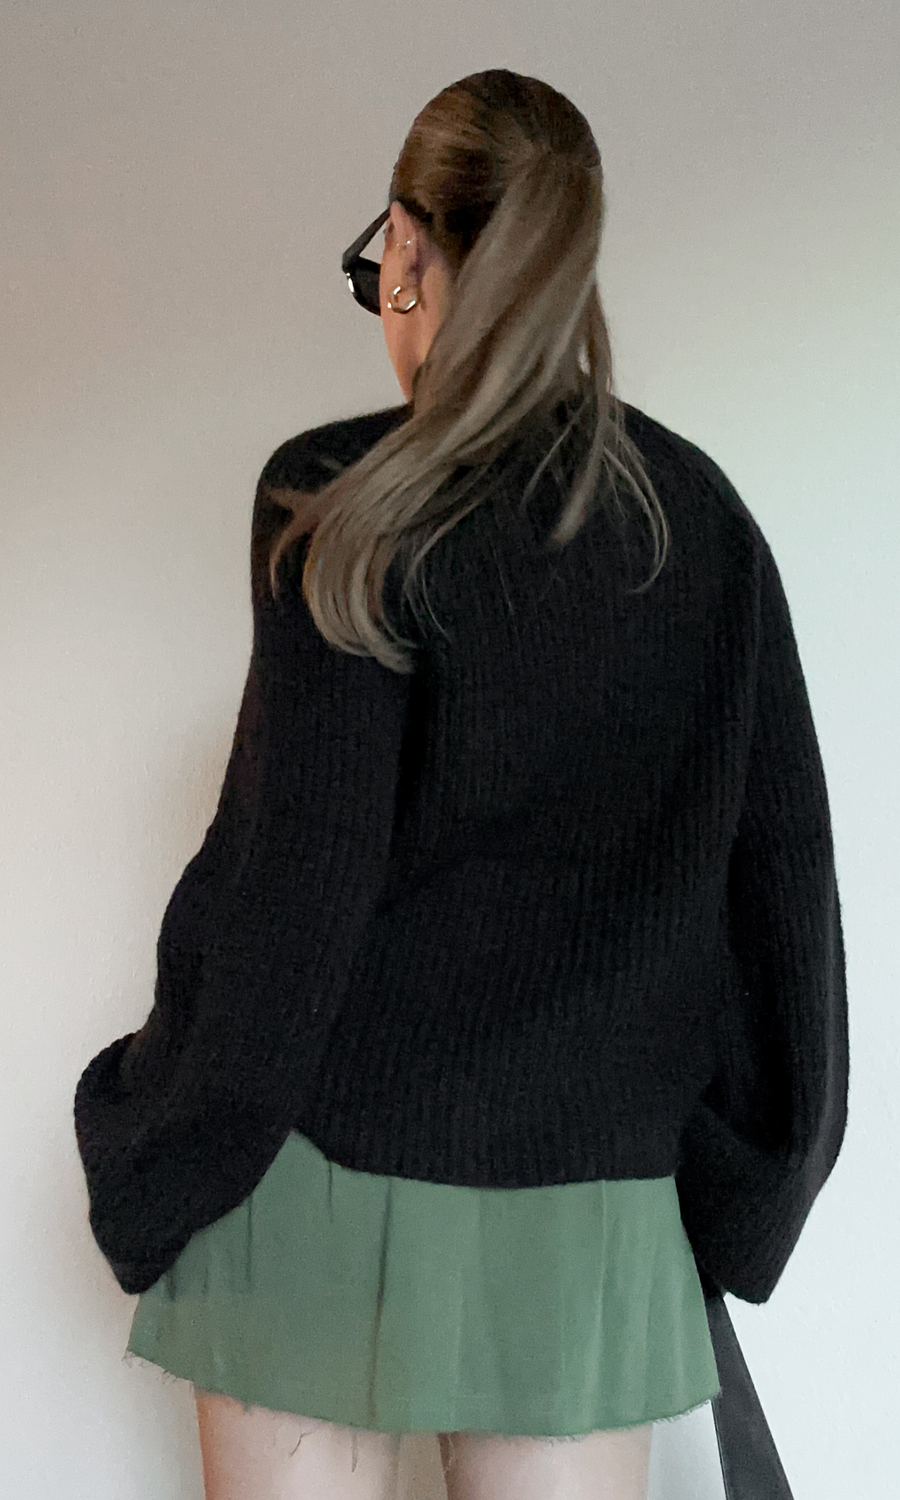 Staying In Sweater - FINAL SALE